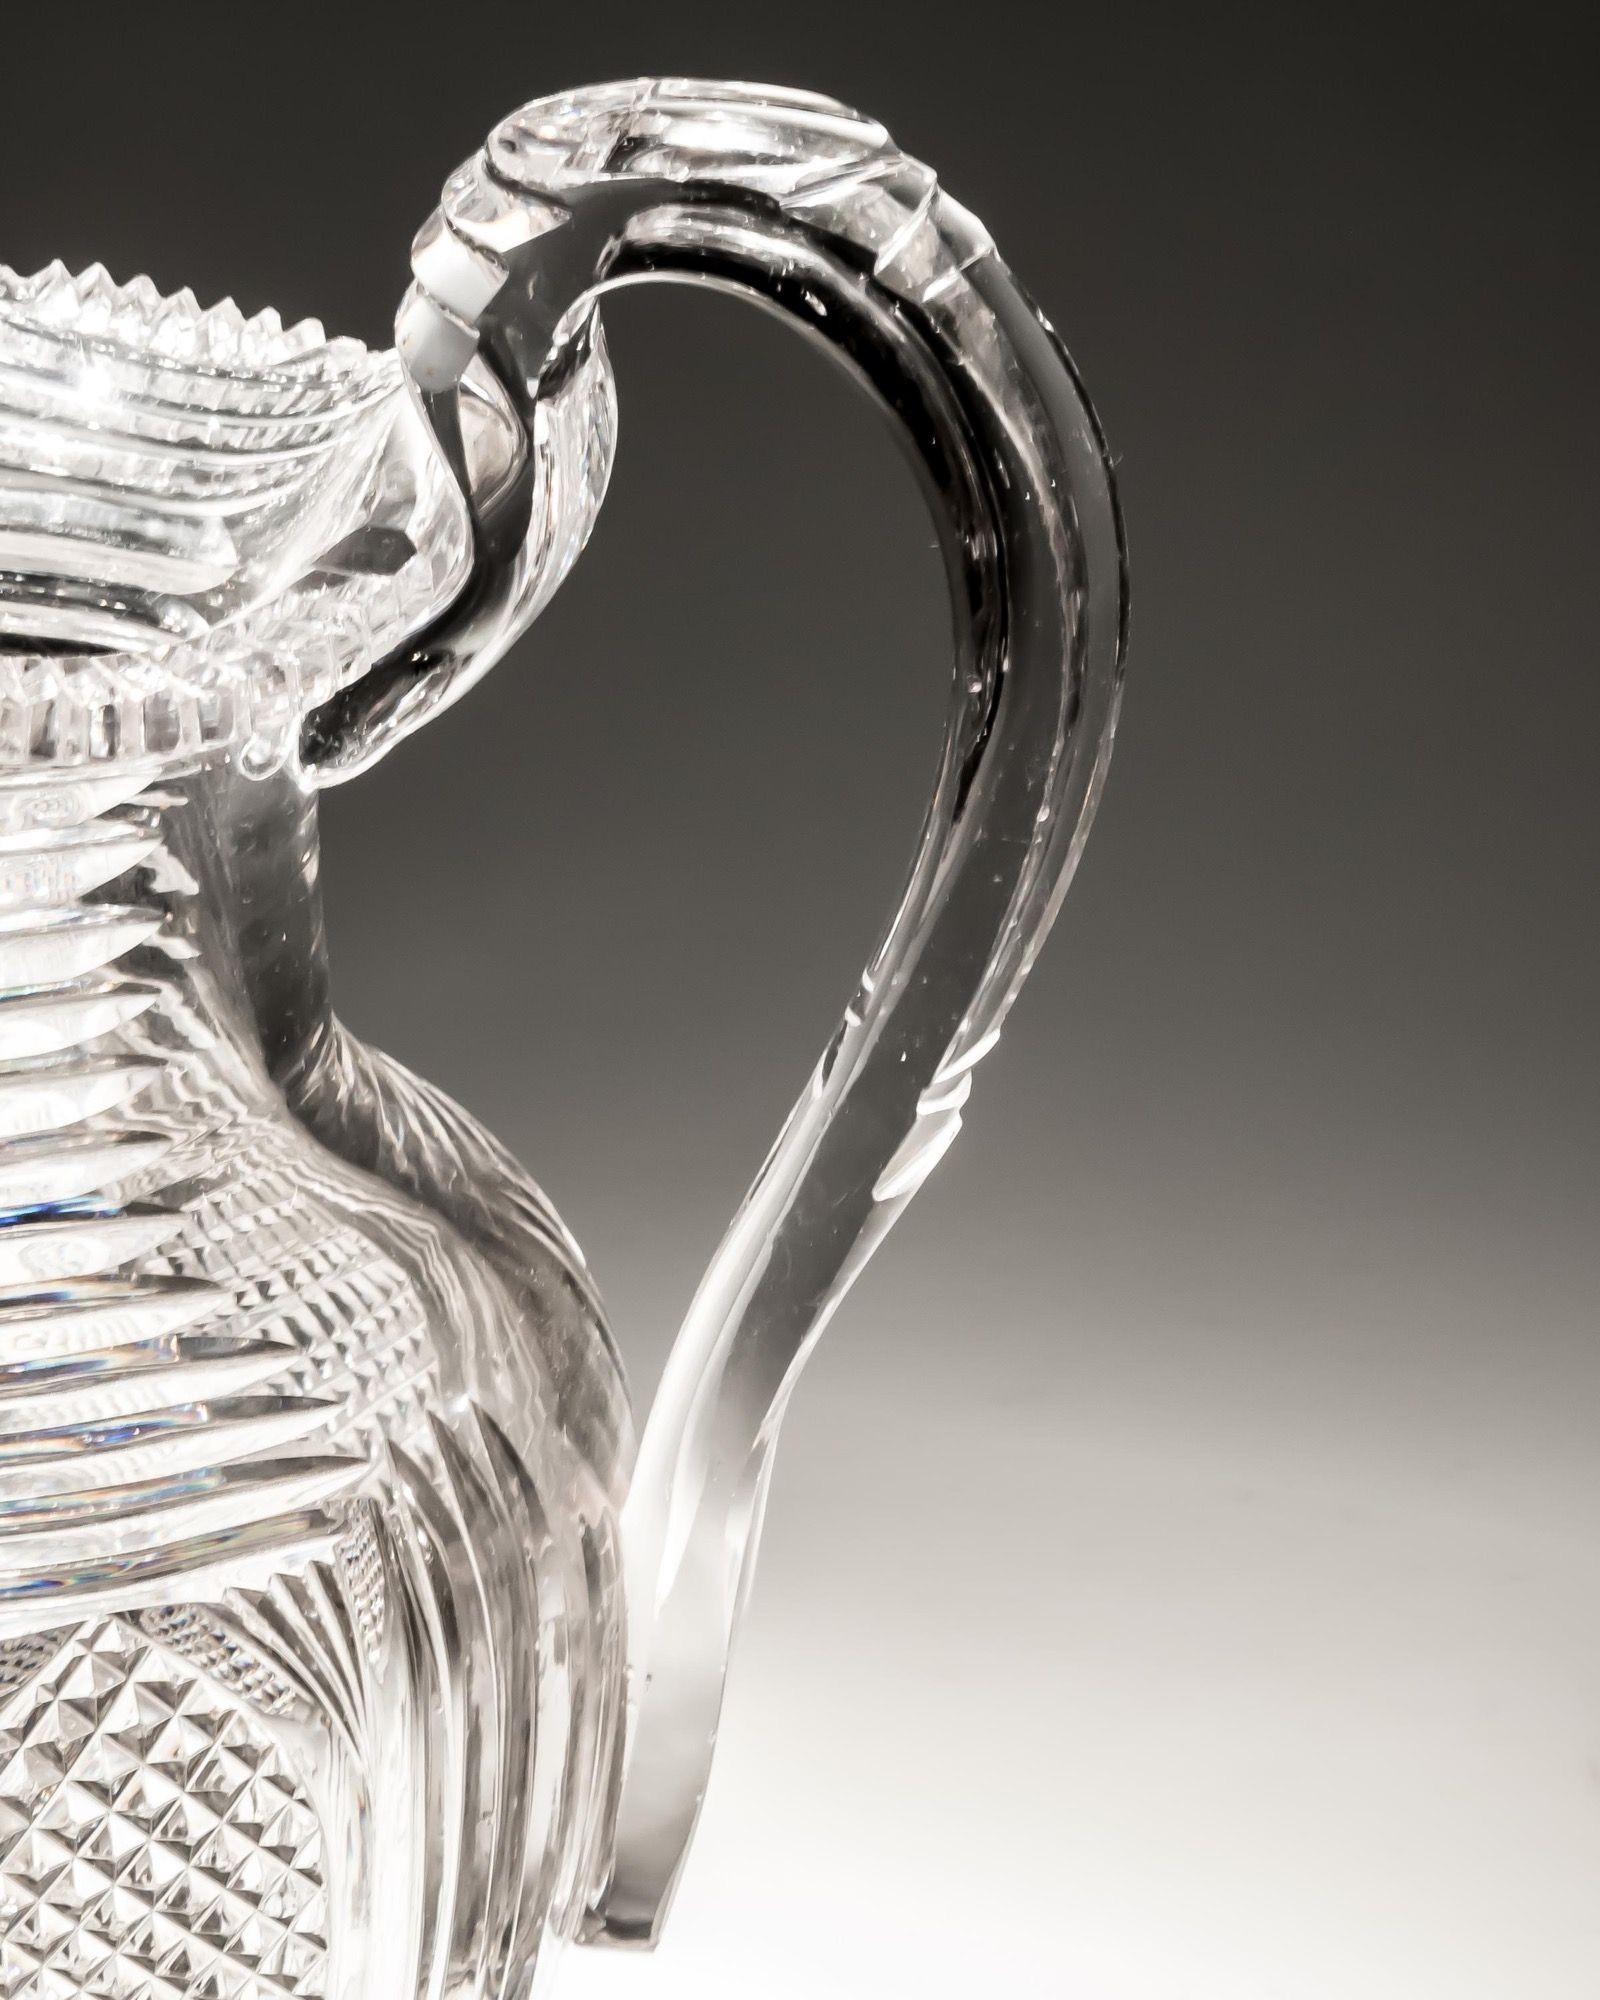 A fine Regency water jug cut with unusual arched diamond panels and step cut neck.

England, circa 1820.

Measures: Height: 22 cm (8 3/4